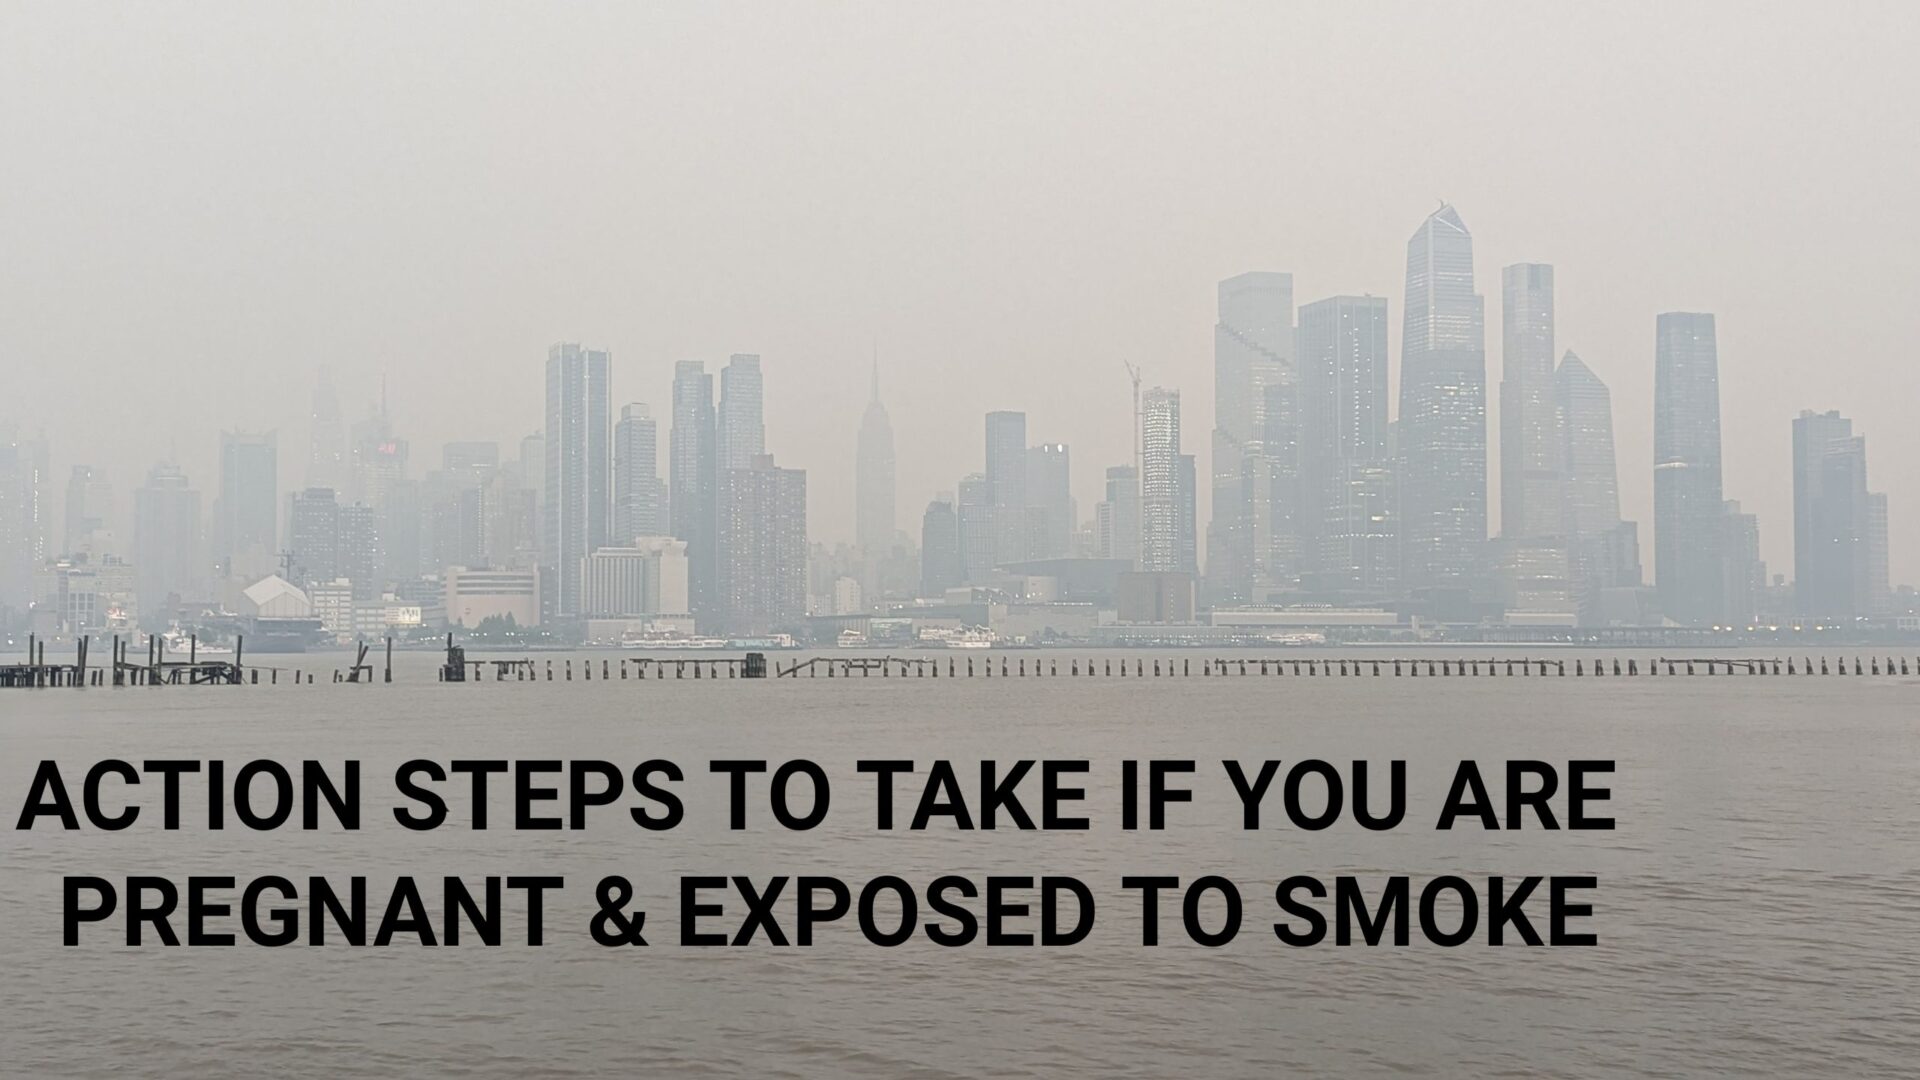 A city skyline with smoke in the background.